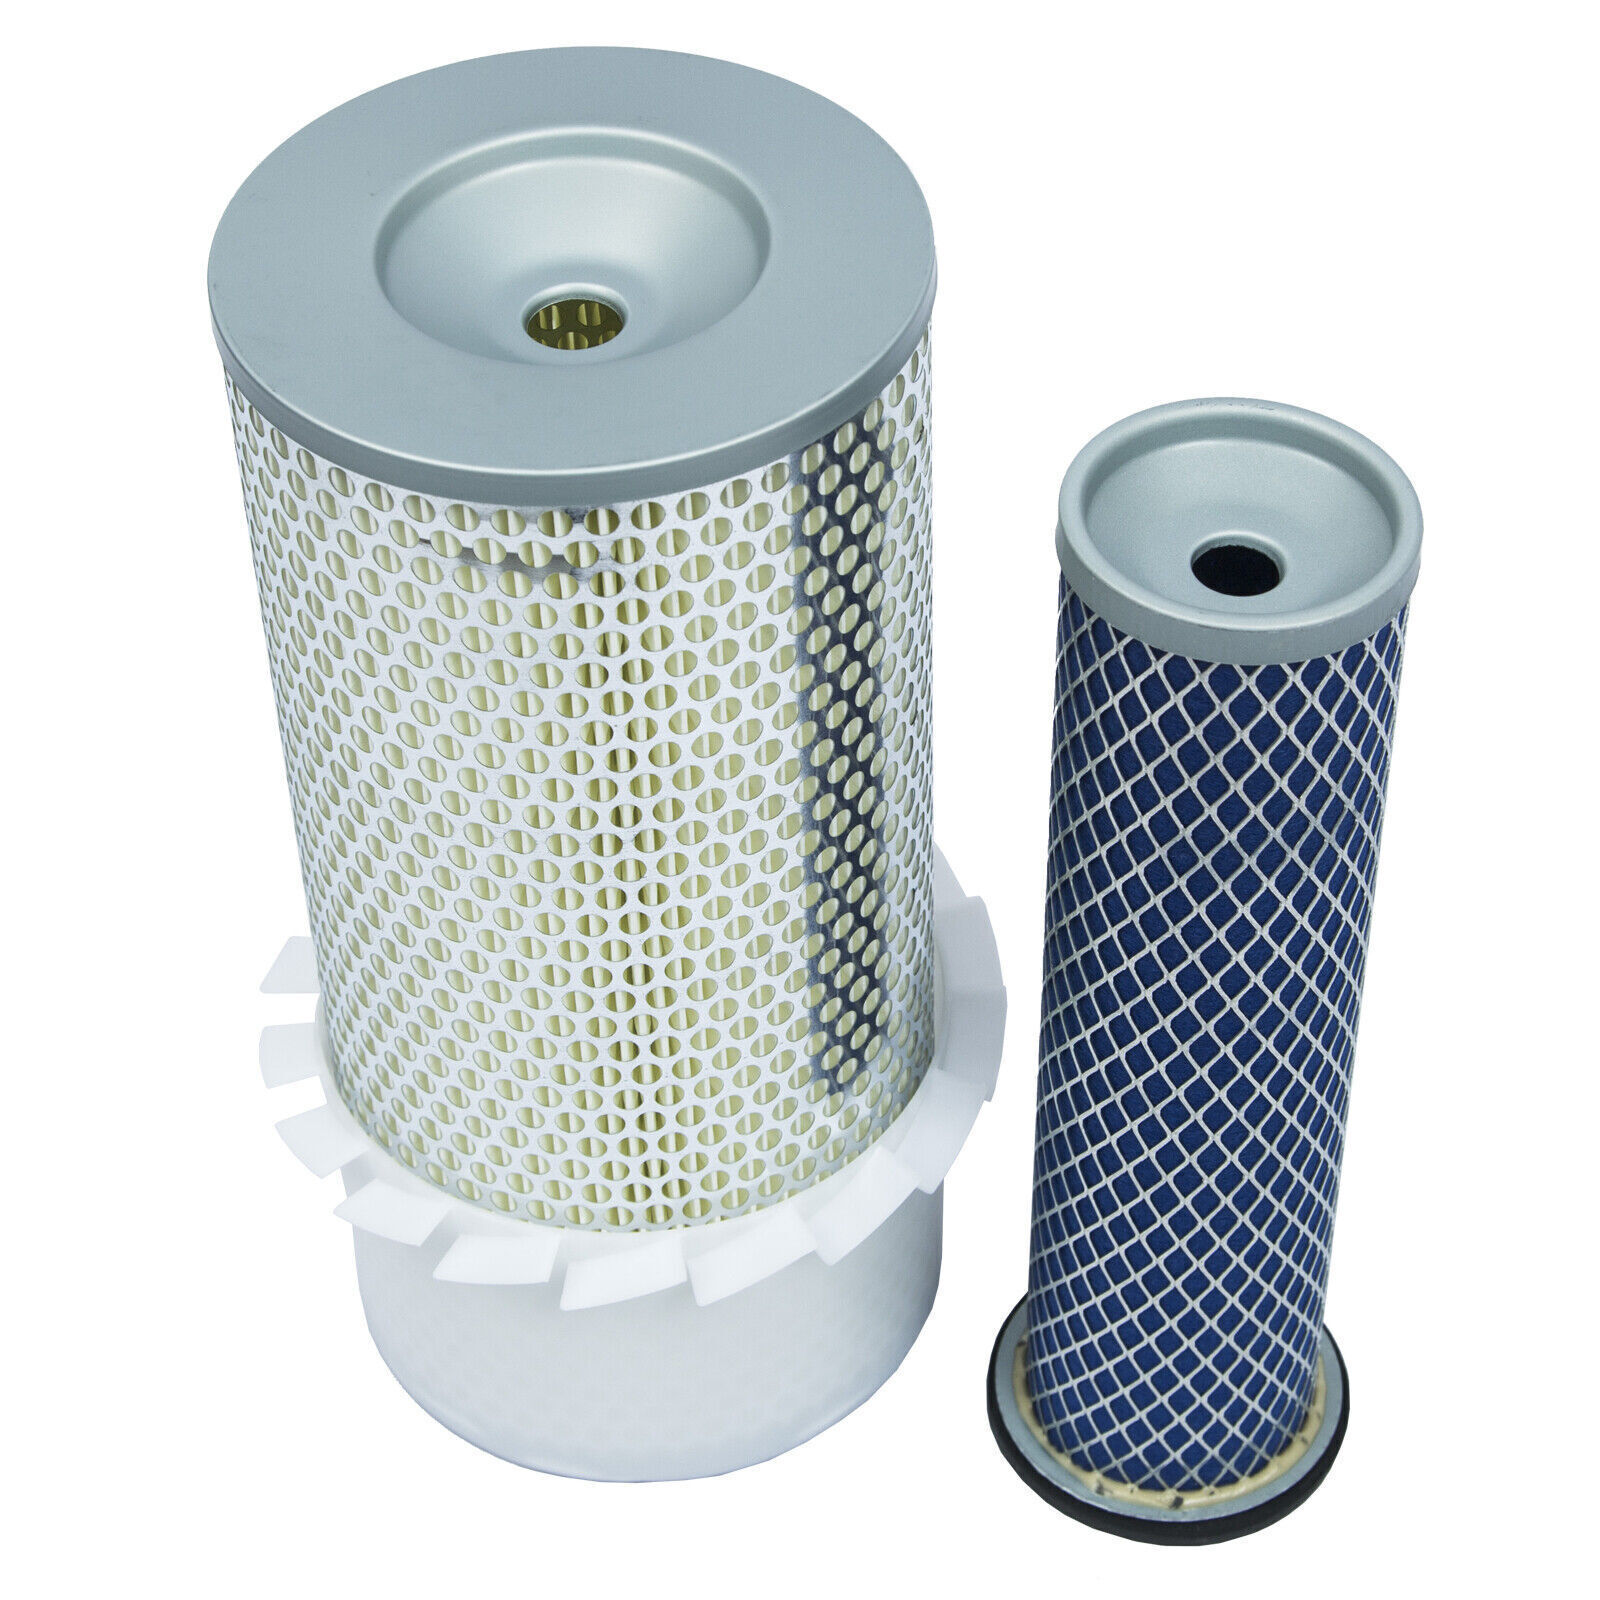 Air Filter for 6598492 & 6598362 Fits Bobcat S160 S175 S185 S205 T180 T190